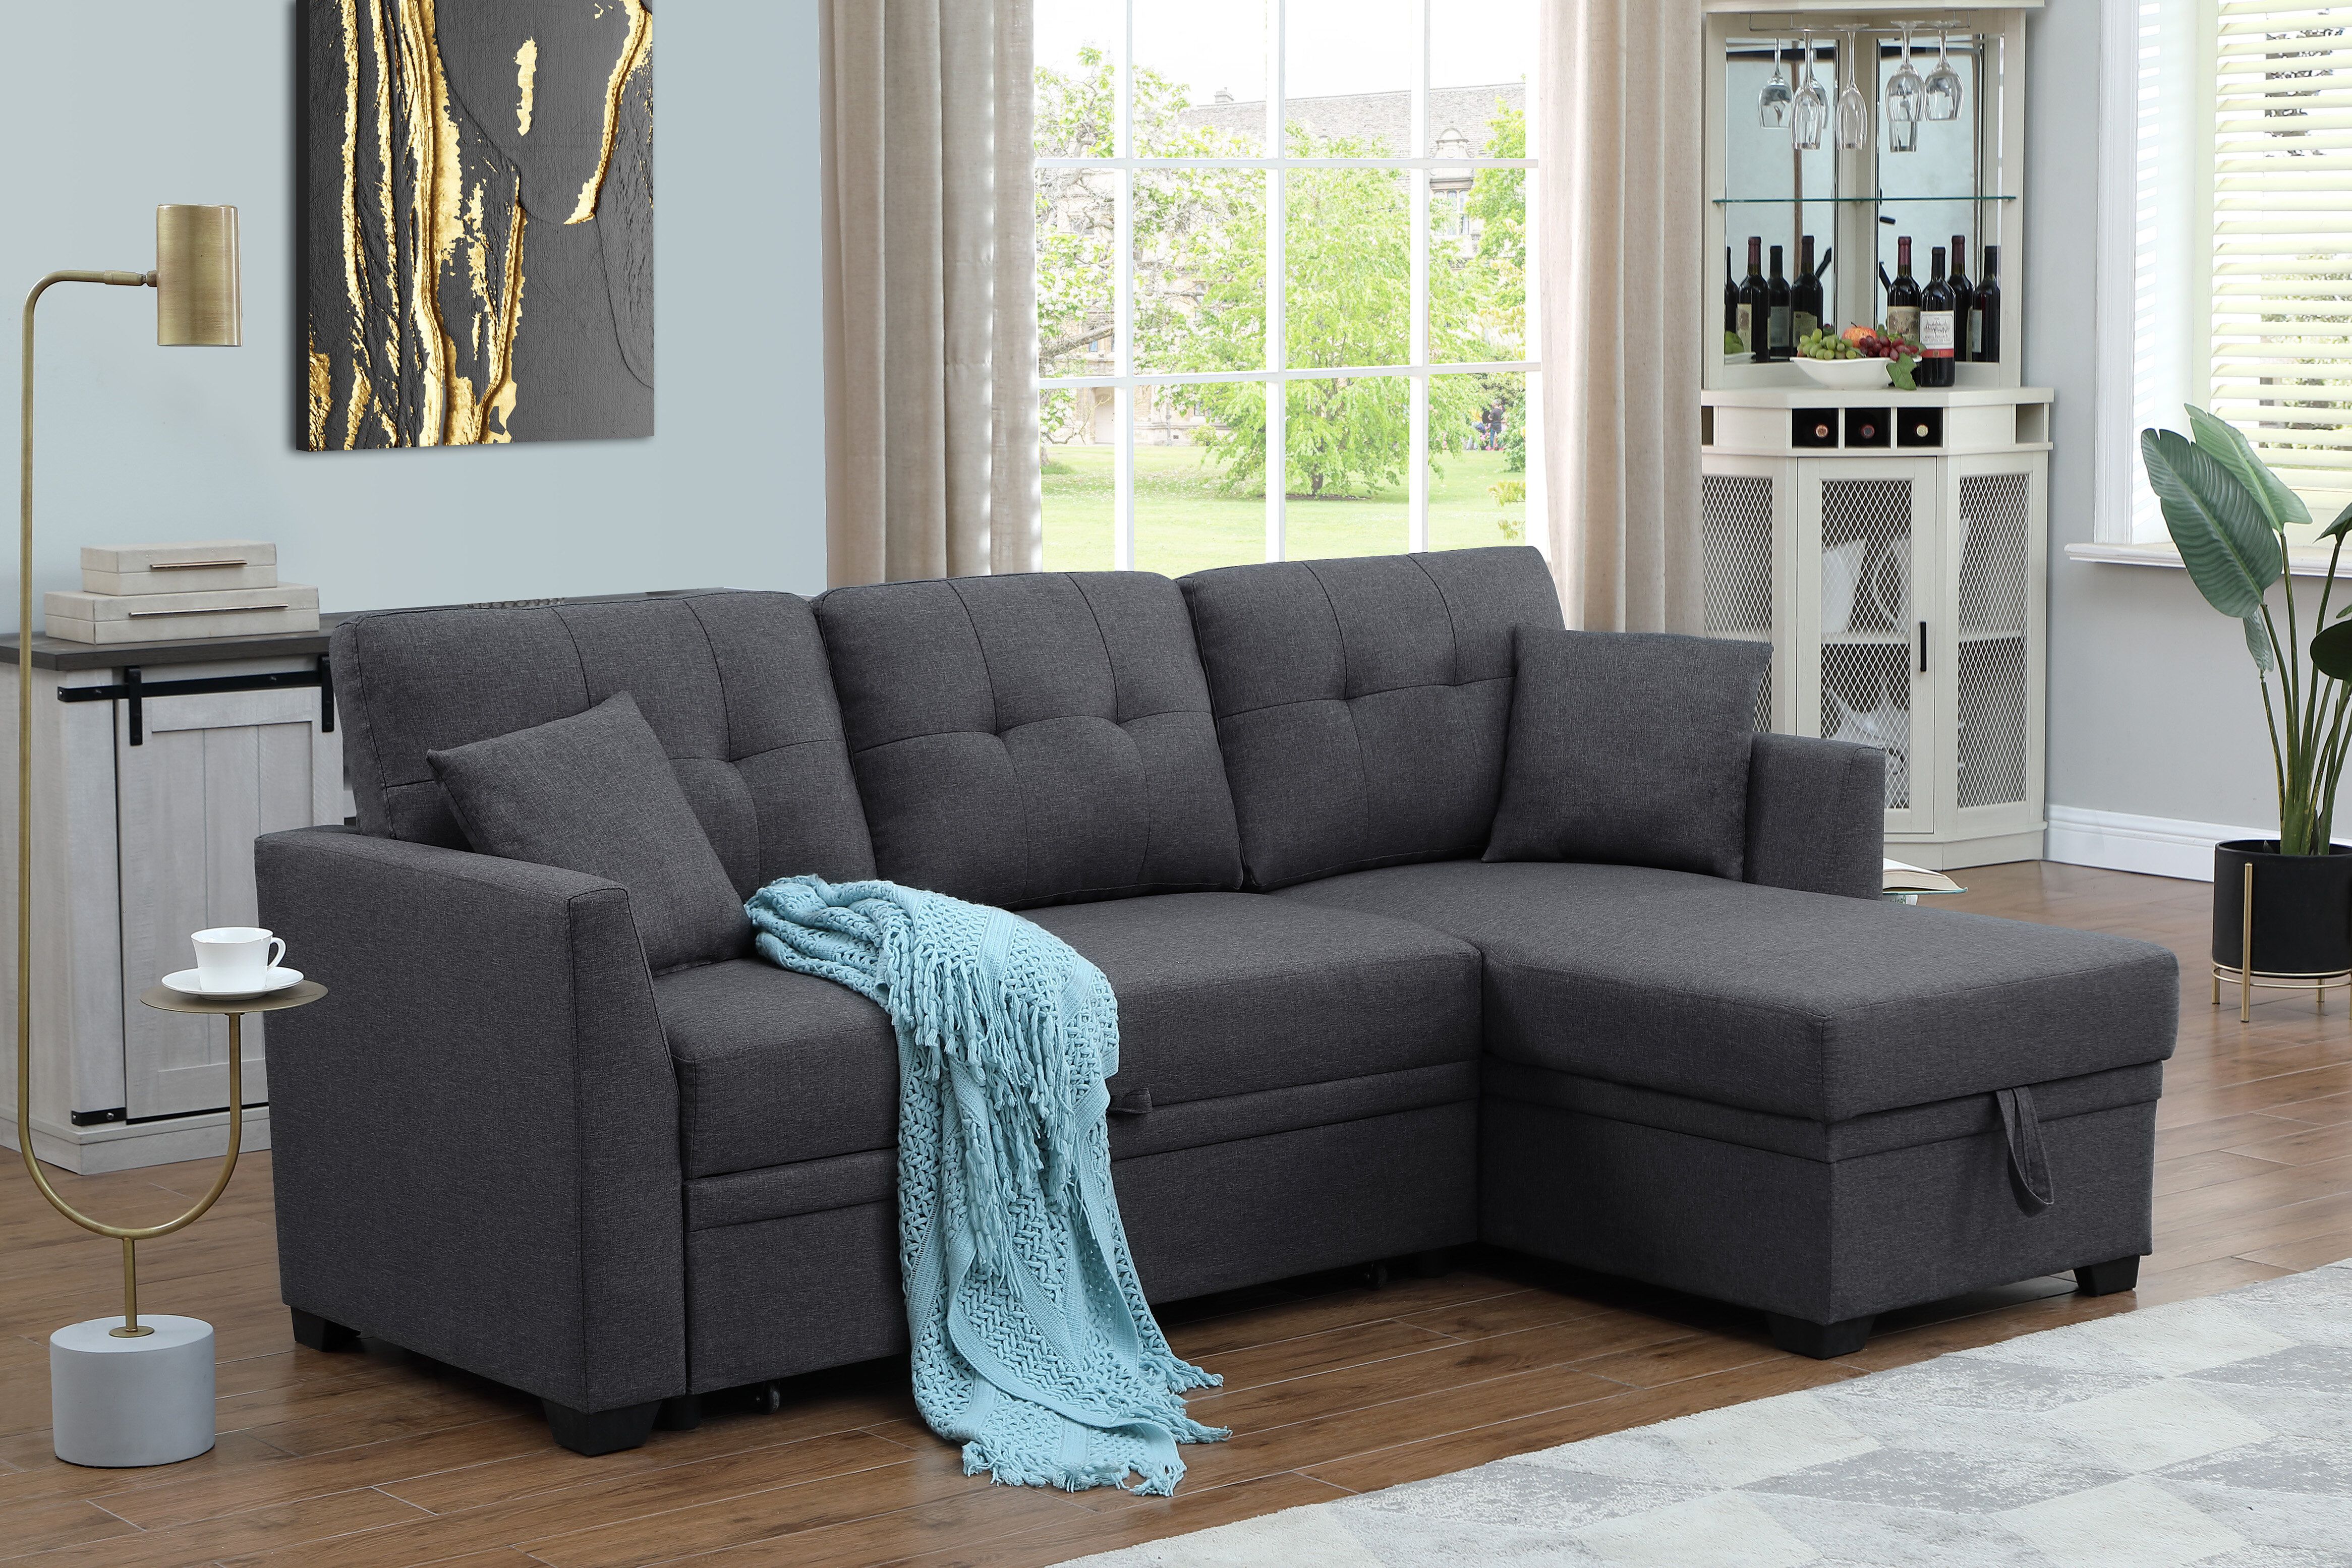 Latitude Run® Convertible Sleeper Sofa & Chaise & Reviews | Wayfair For Convertible Sofa With Matching Chaise (Gallery 1 of 20)